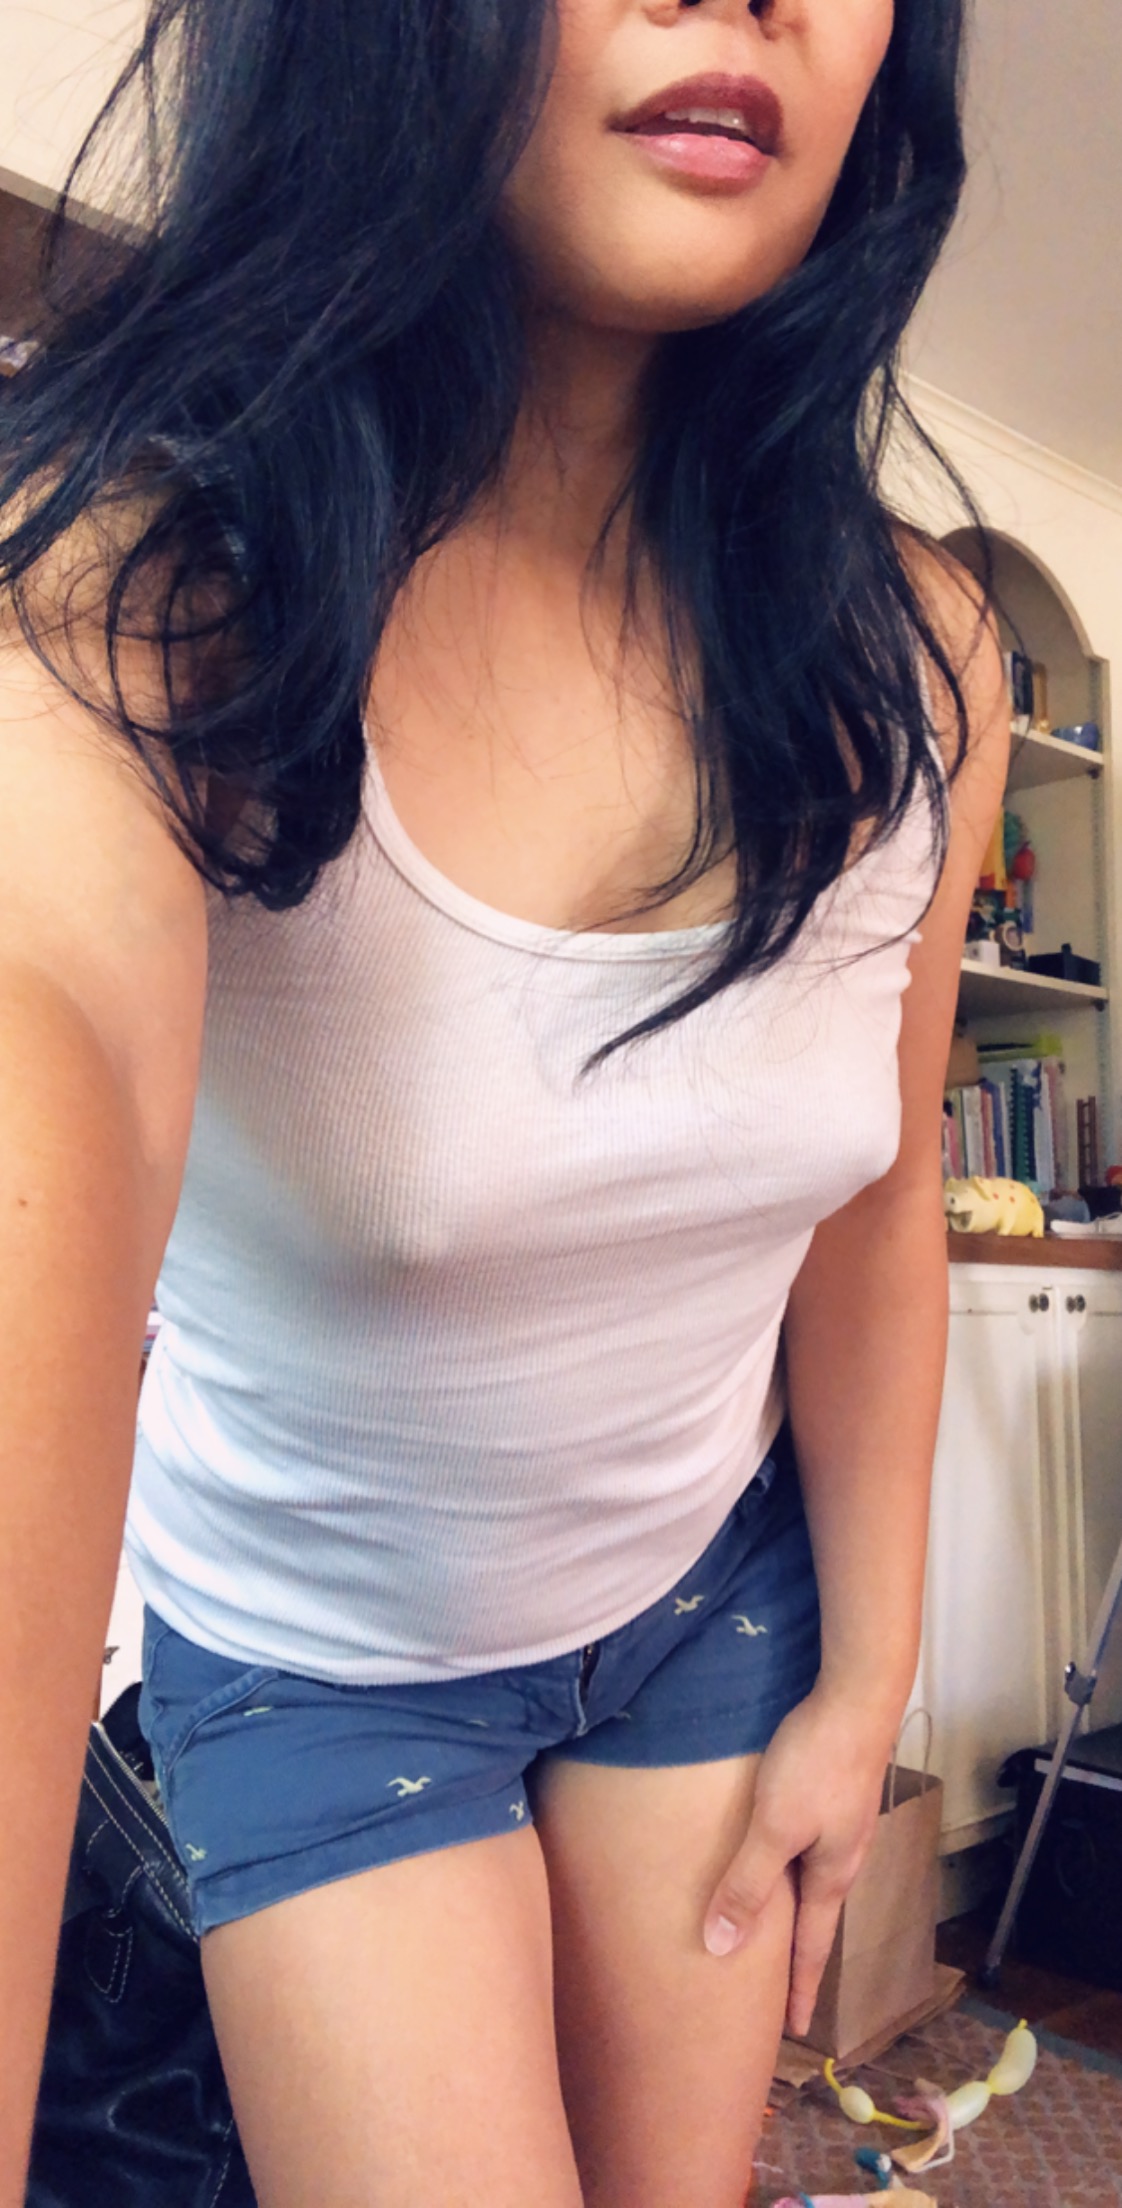 May Ling Su bedhead in sheer tank top you can see her nipples through